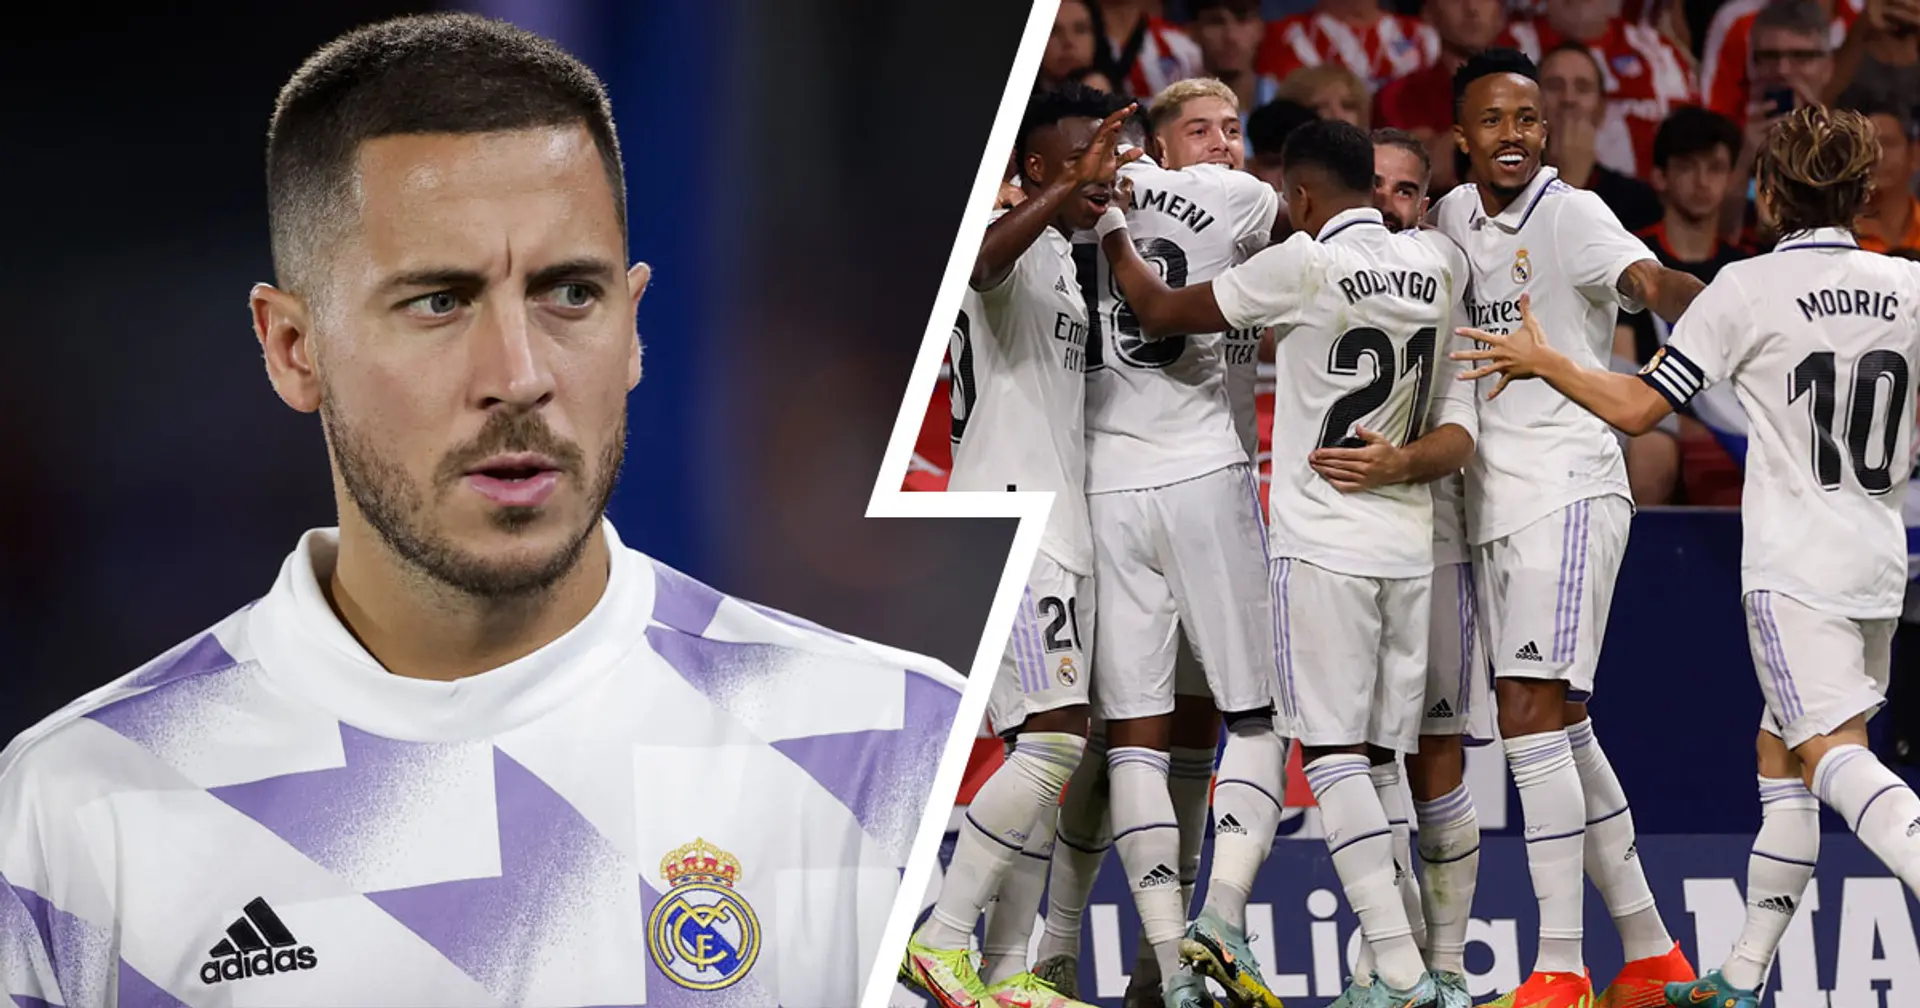 Hazard, Nacho or Asensio? Which players do you want to see start against Elche and why?